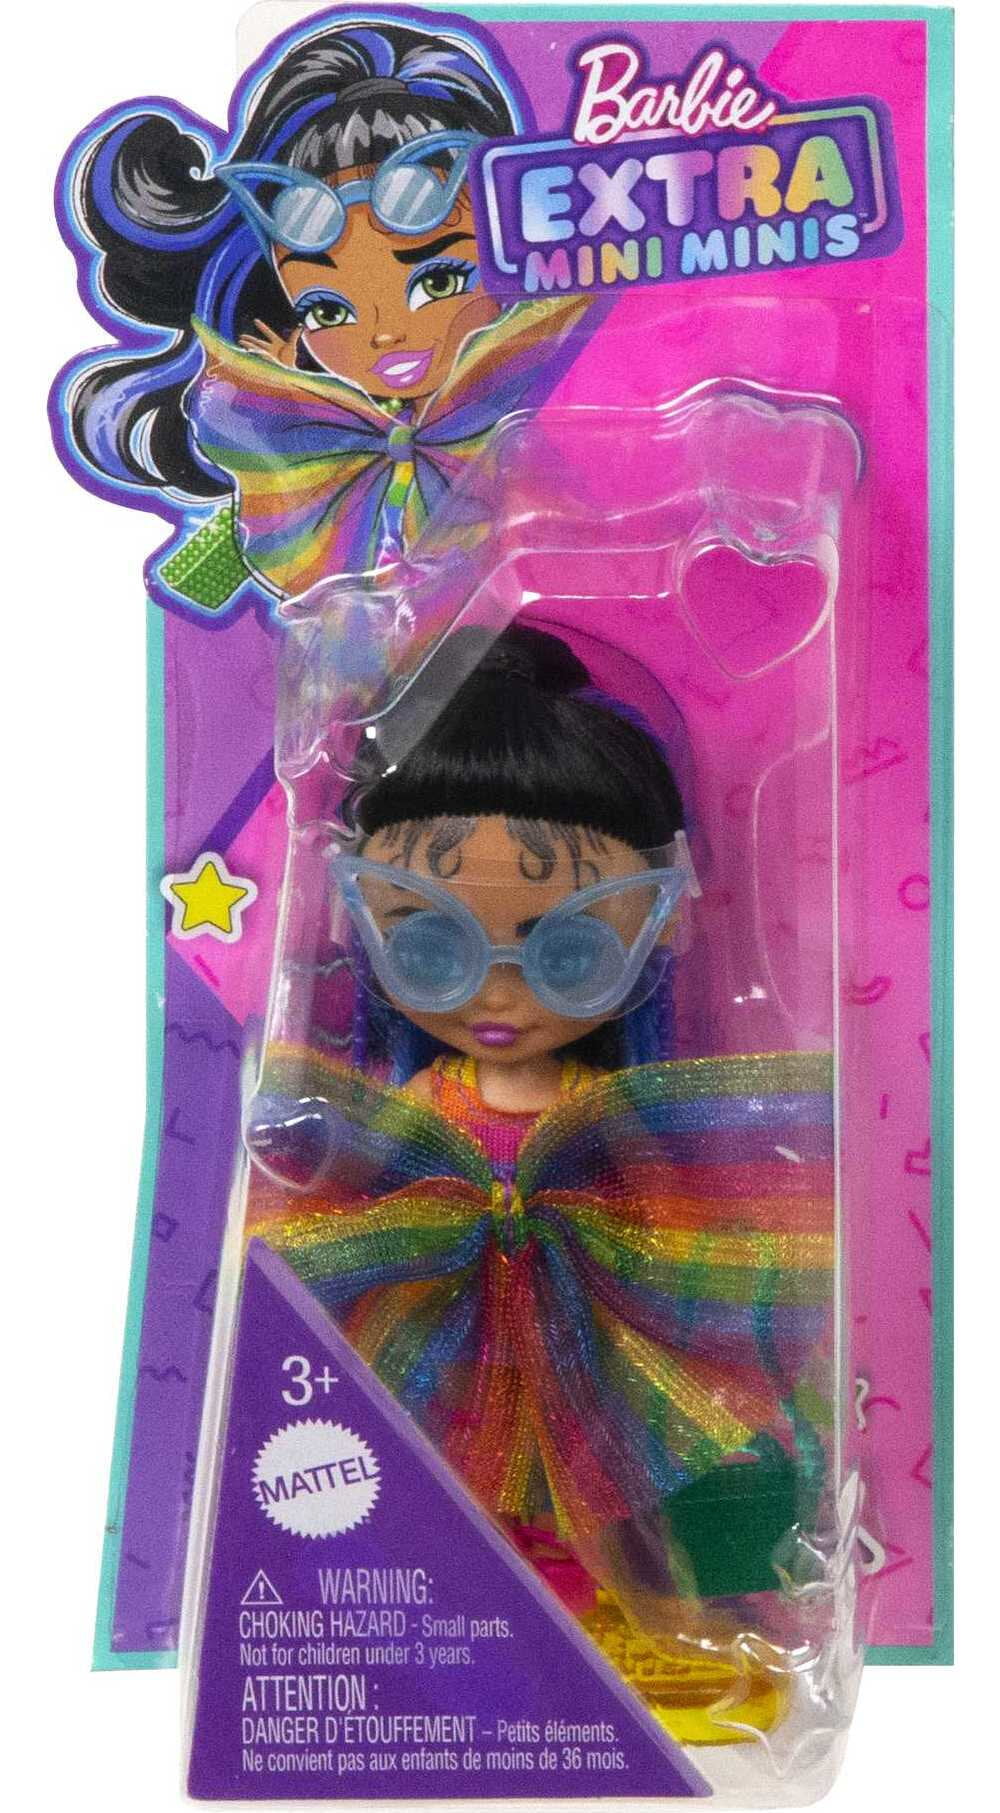 Barbie Extra Minis Doll #6 (5.5 in) With Rainbow Hair, Wearing Flower Print  Dress, with Doll Stand & Accessories Including Sunglasses and Purse, Gift